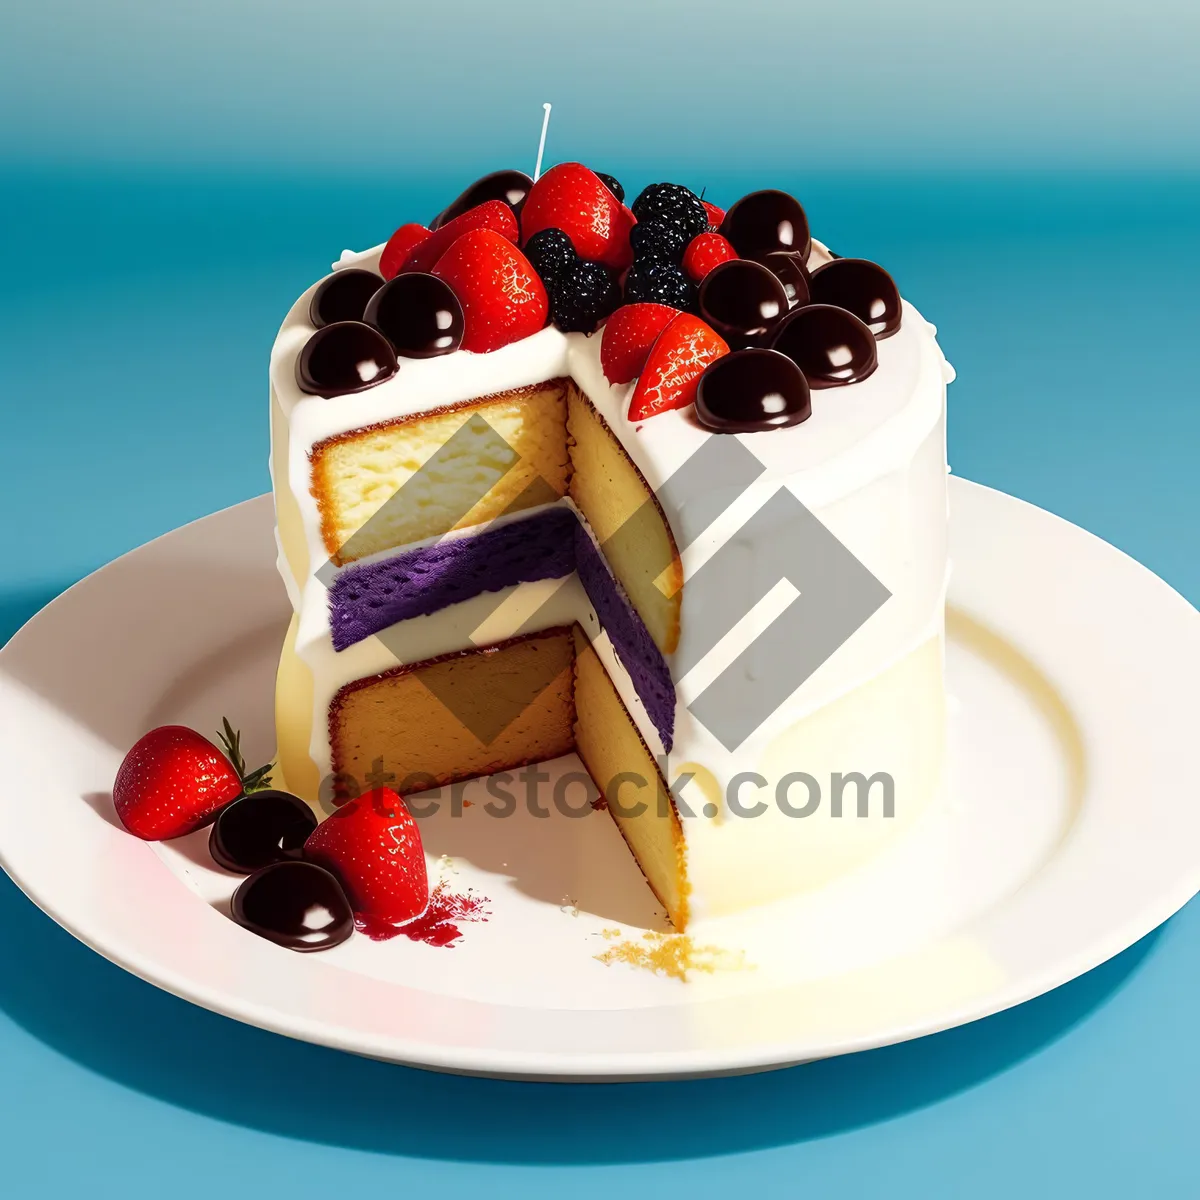 Picture of Delicious Berry Cake with Fresh Summer Berries